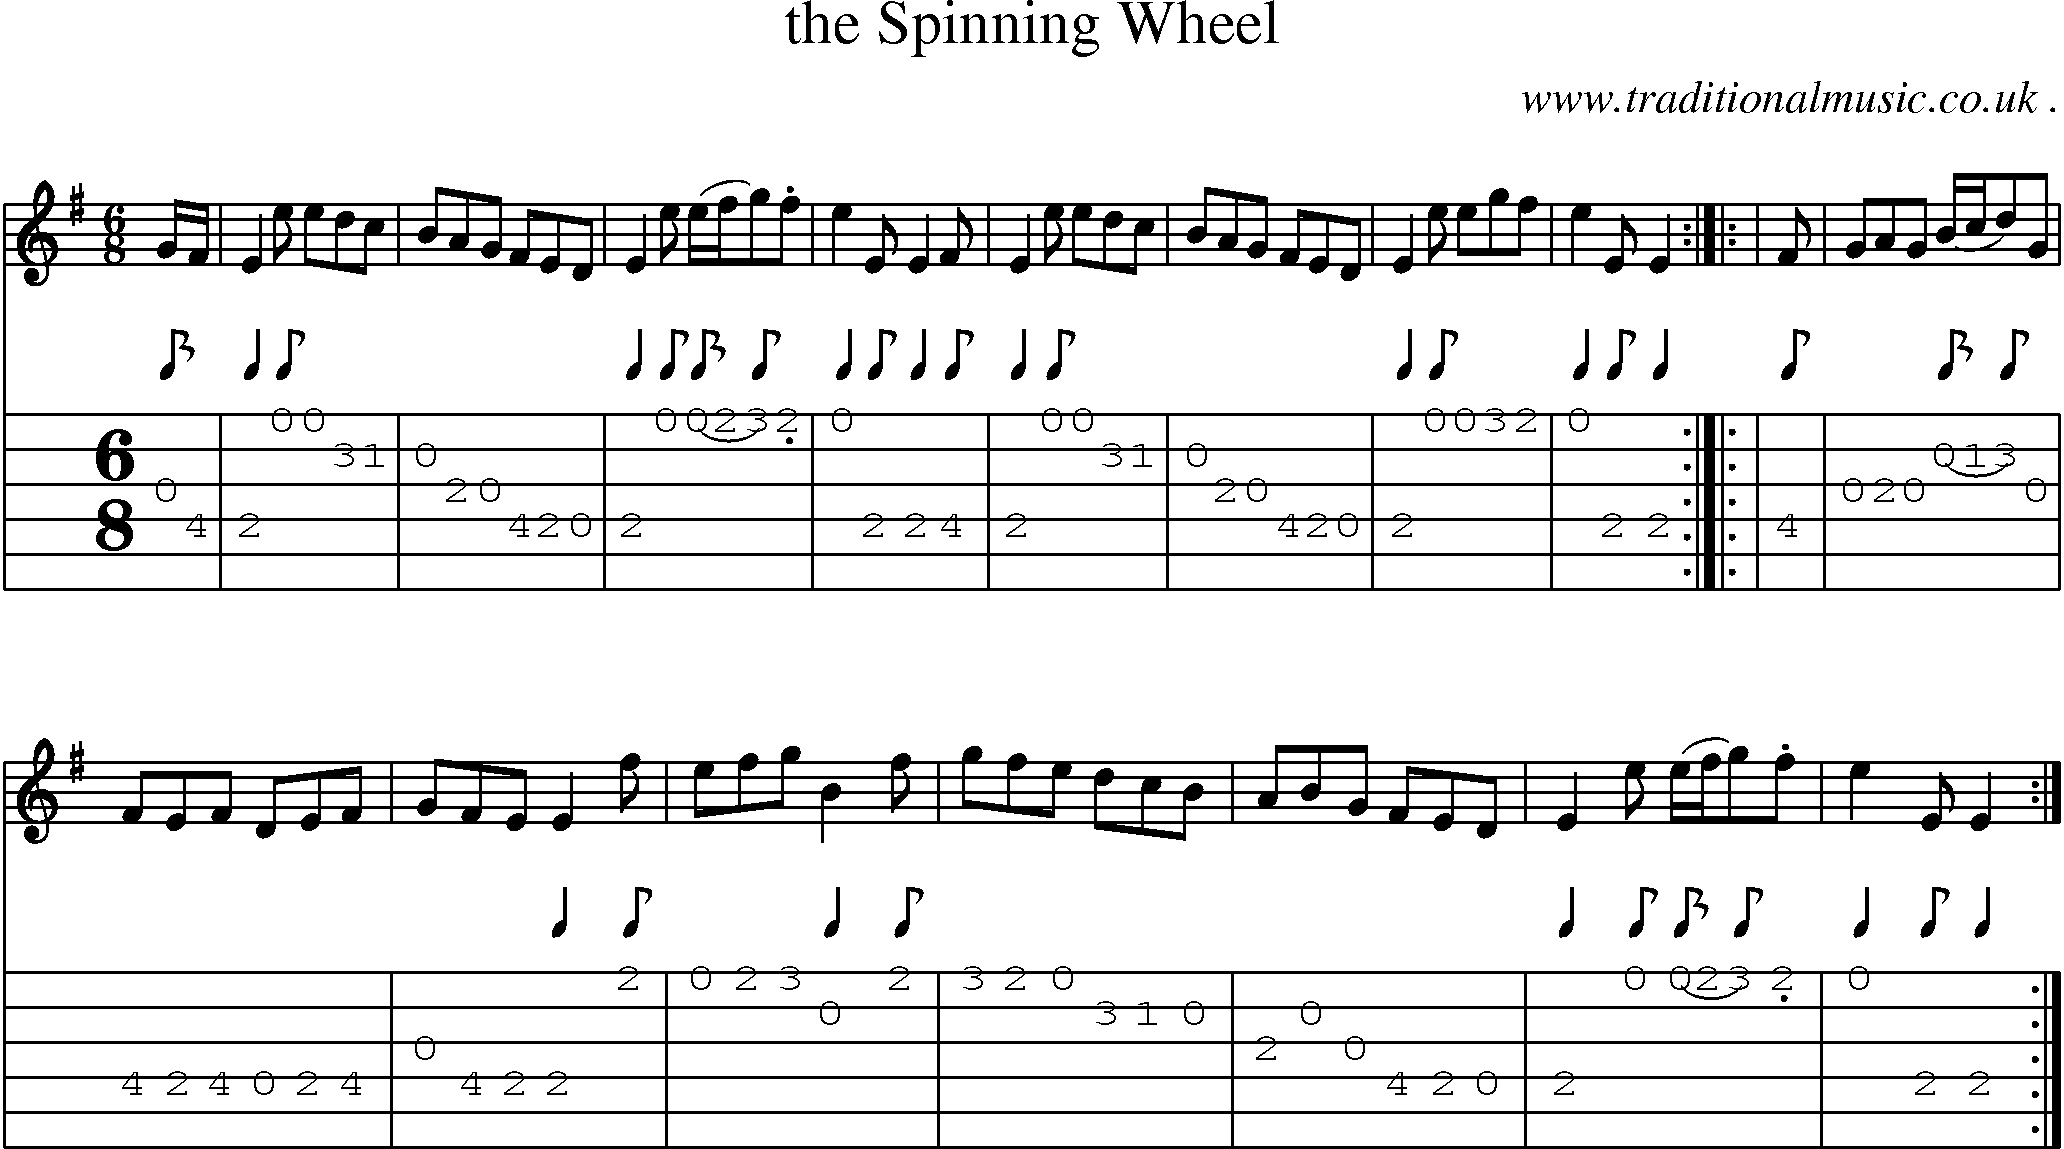 Sheet-Music and Guitar Tabs for The Spinning Wheel